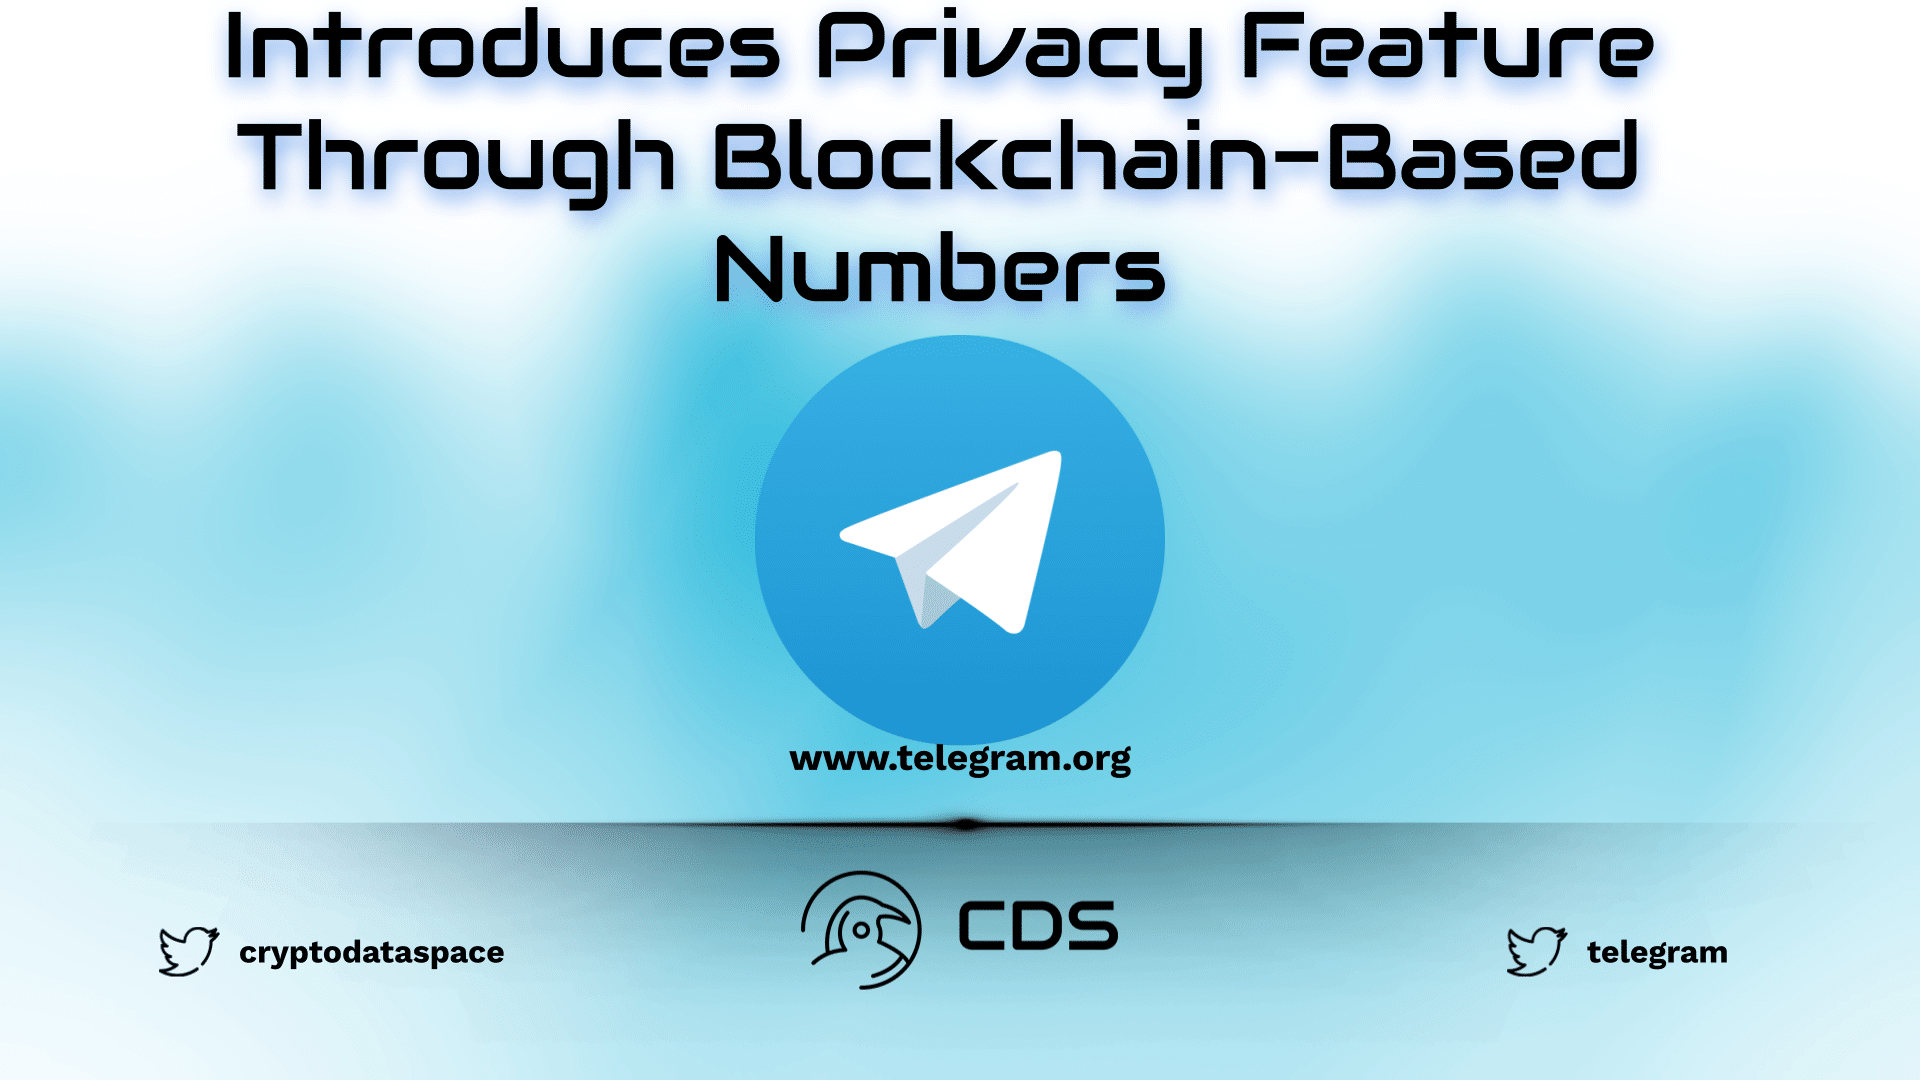 Telegram Introduces Privacy Feature Through Blockchain-Based Numbers